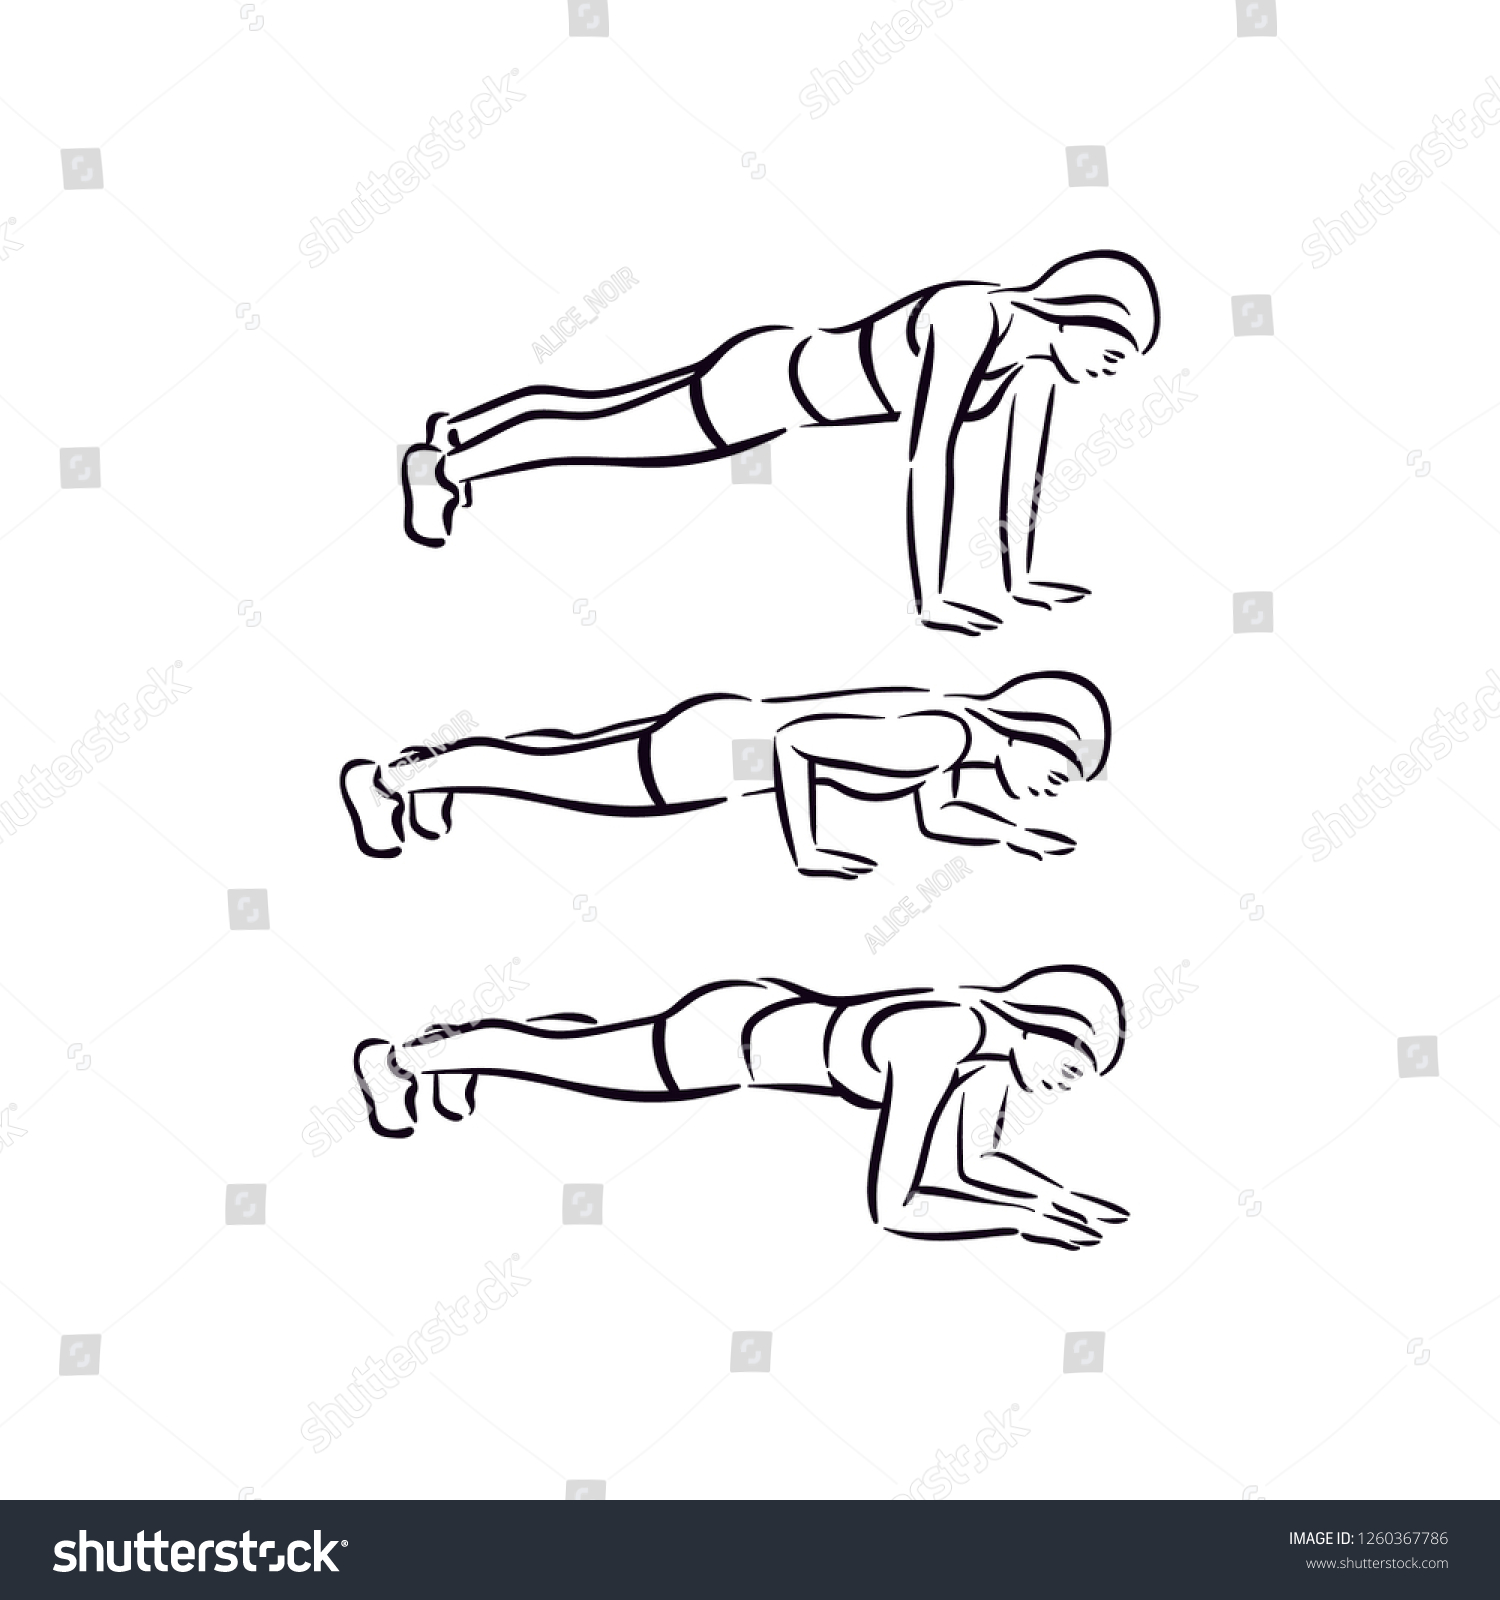 Fitness Exercise Down Planks Work Out Stock Vector Royalty Free